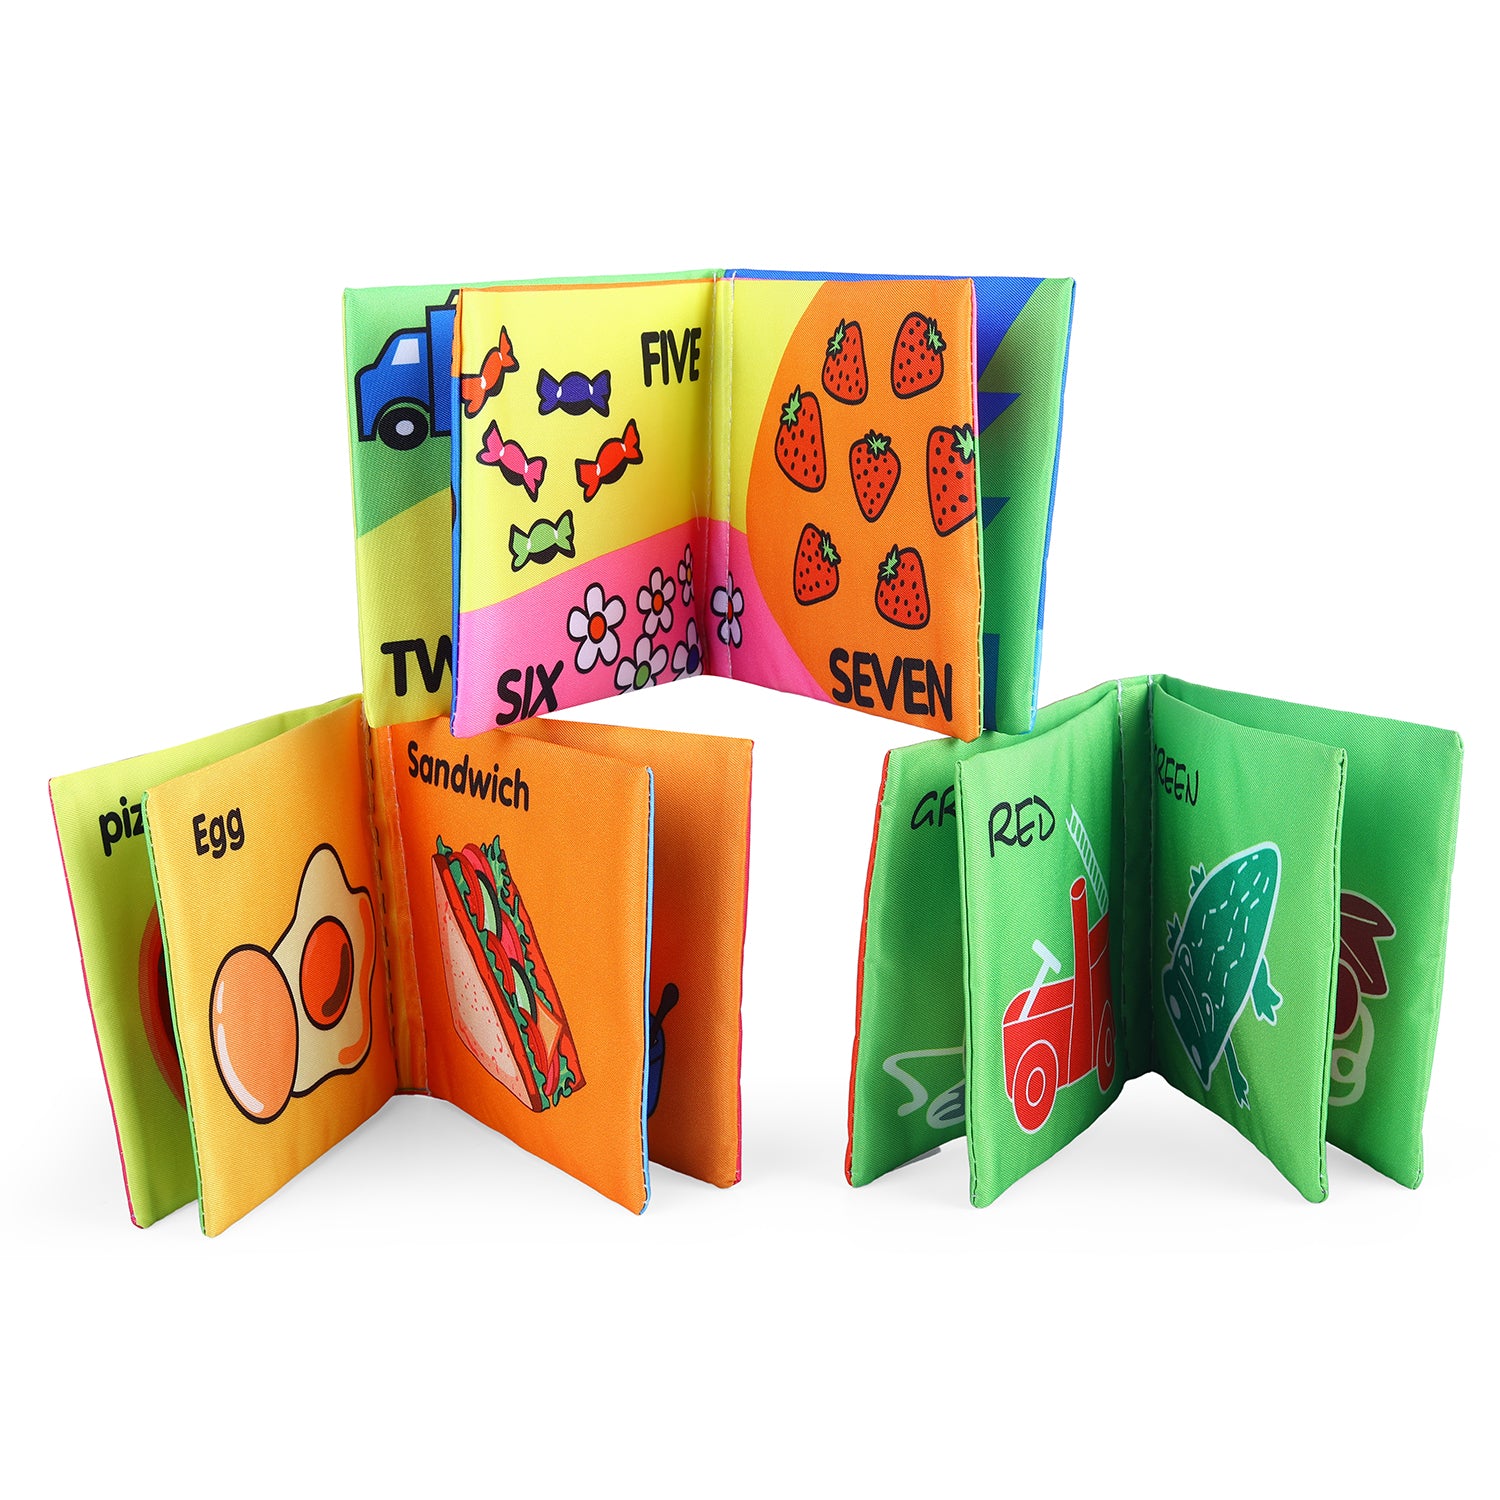 Numbers Animals Shapes Colours Food Occupations Baby Educational Cloth Book with Sound Paper Set of 6 - Multicolour - Baby Moo